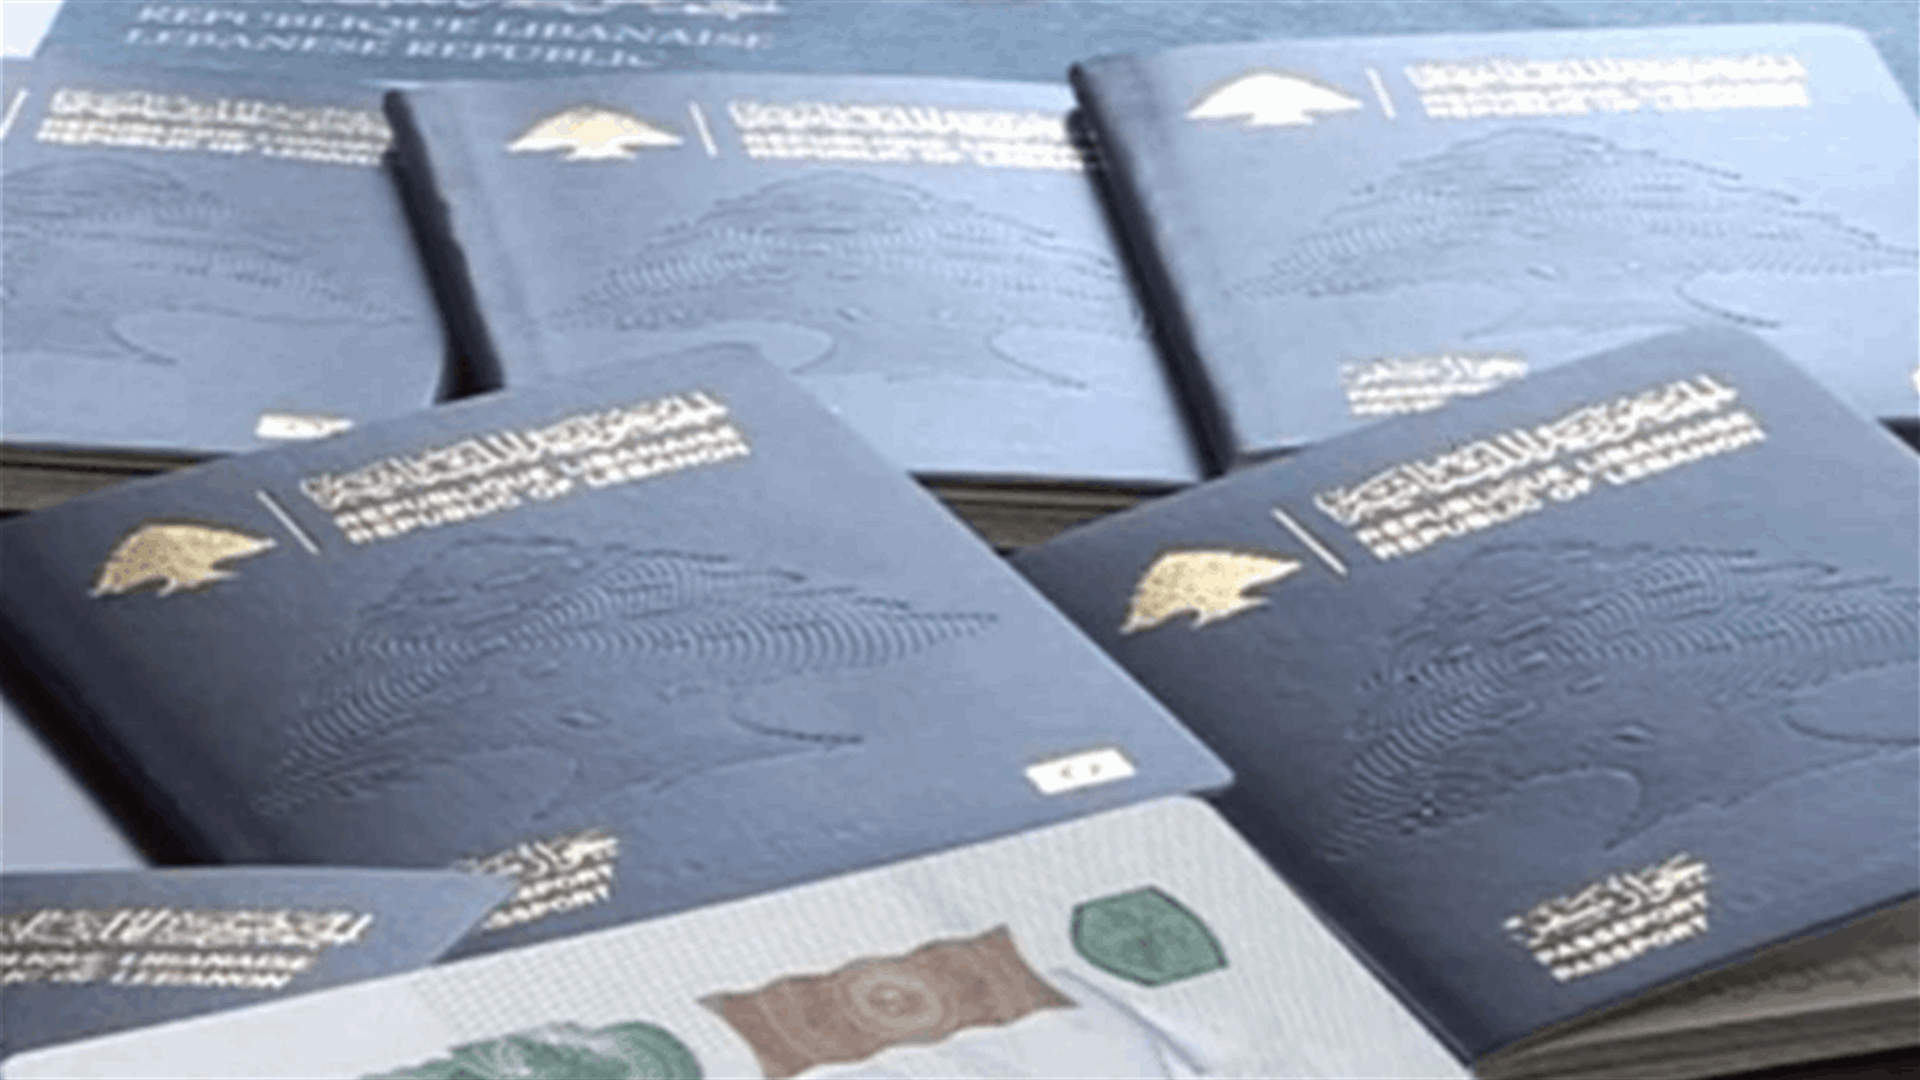 General Security to re-receive applications for biometric passports